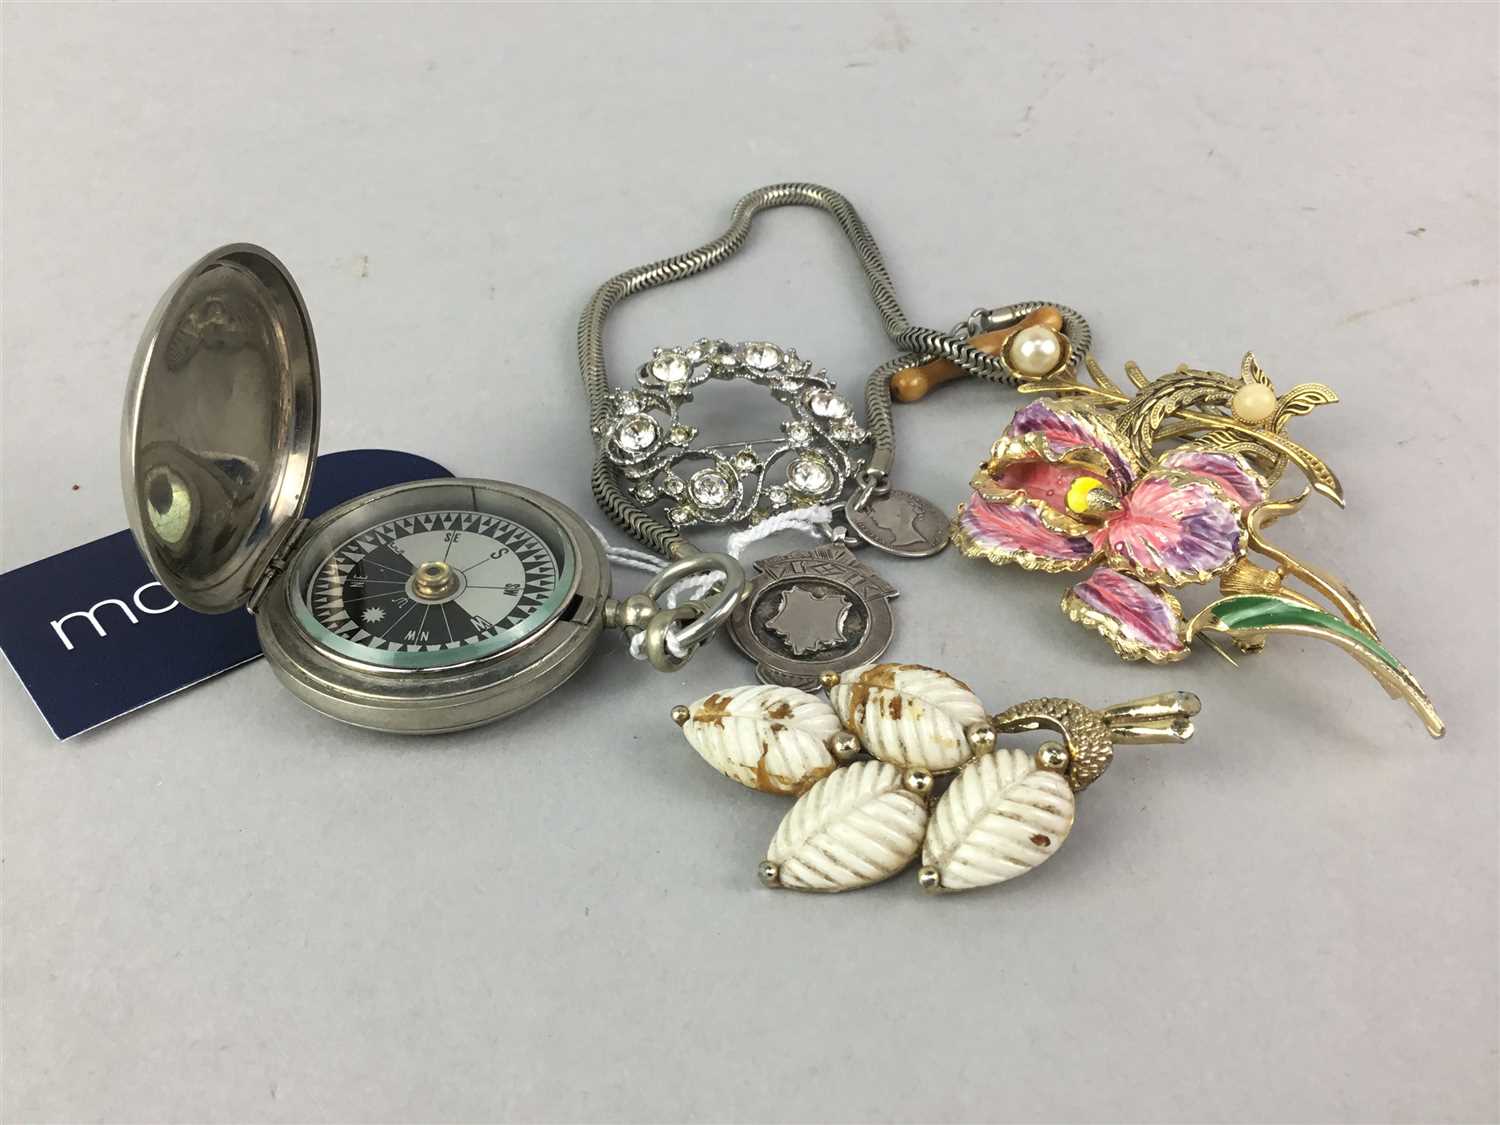 Lot 52 - A MILITARY ISSUE COMPASS AND COSTUME JEWELLERY